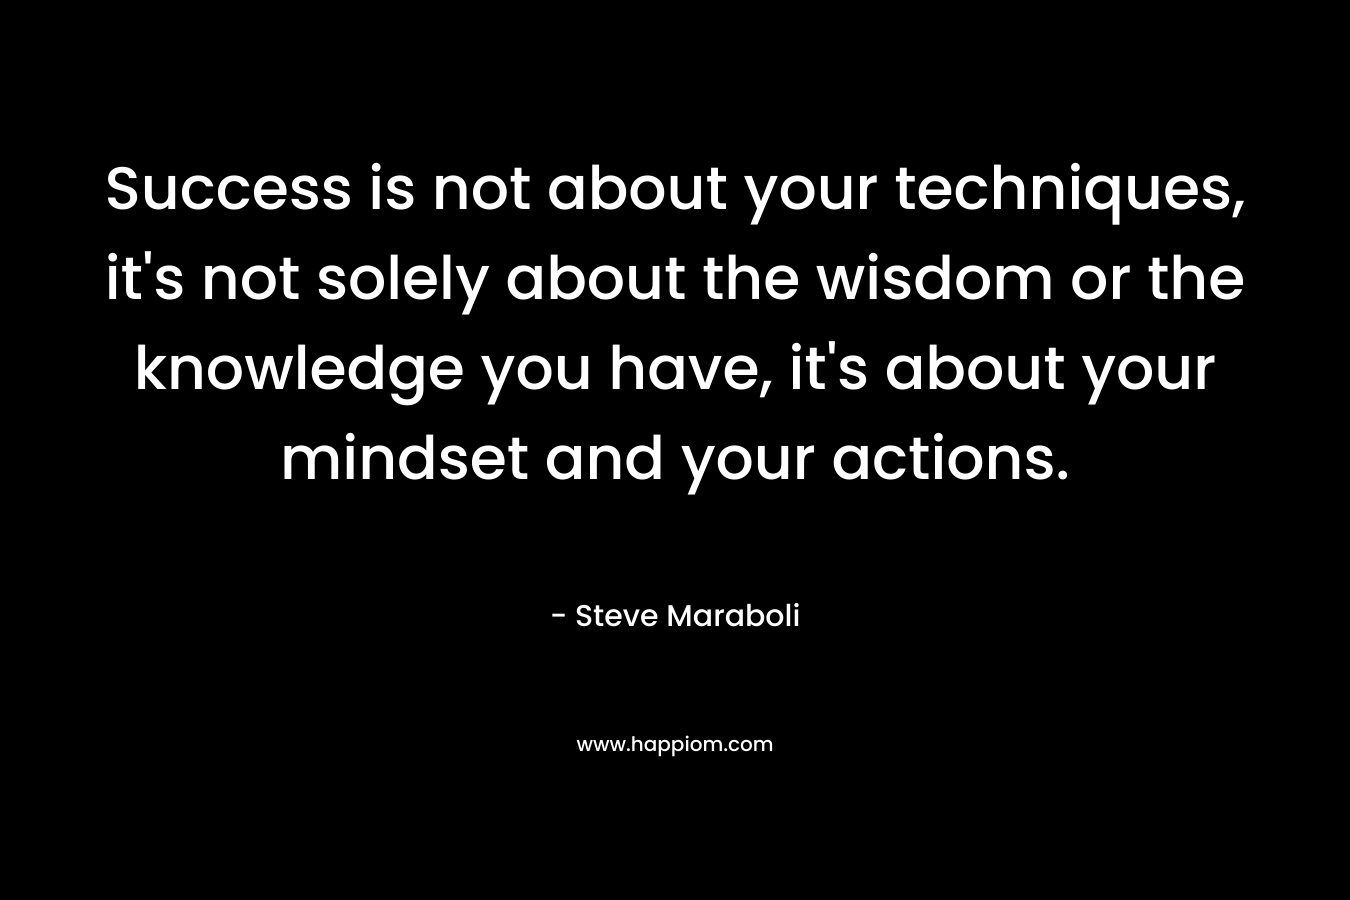 Success is not about your techniques, it’s not solely about the wisdom or the knowledge you have, it’s about your mindset and your actions. – Steve Maraboli